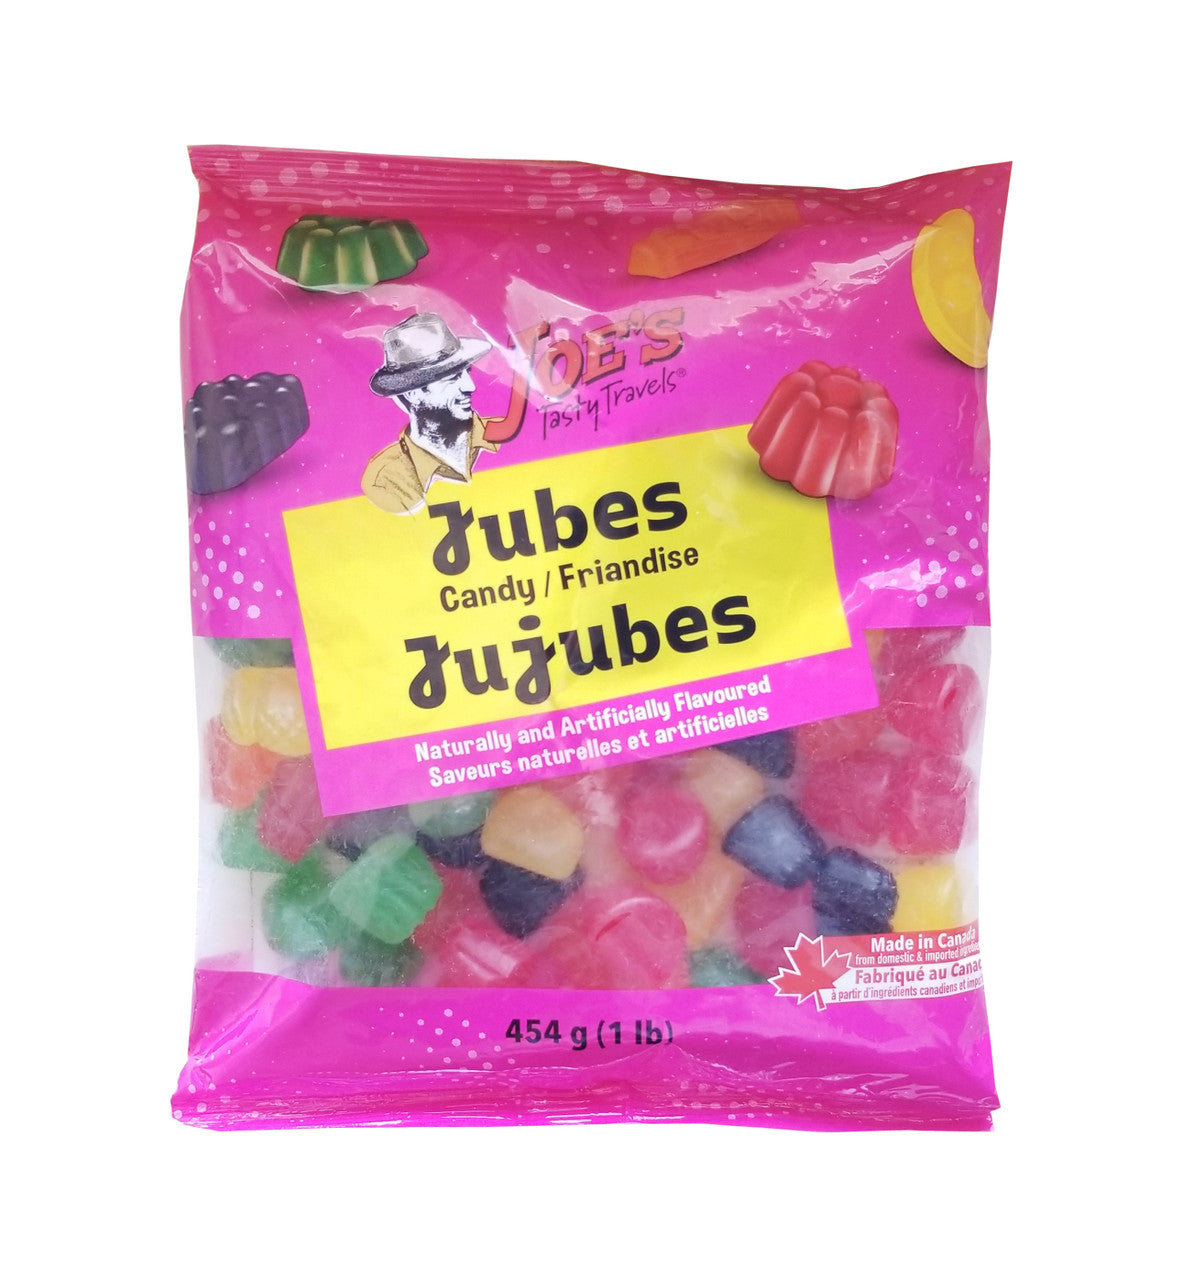 Joe's Tasty Travels, Jujubes Candy, 454g/1 lbs. Bag {Imported from Canada}